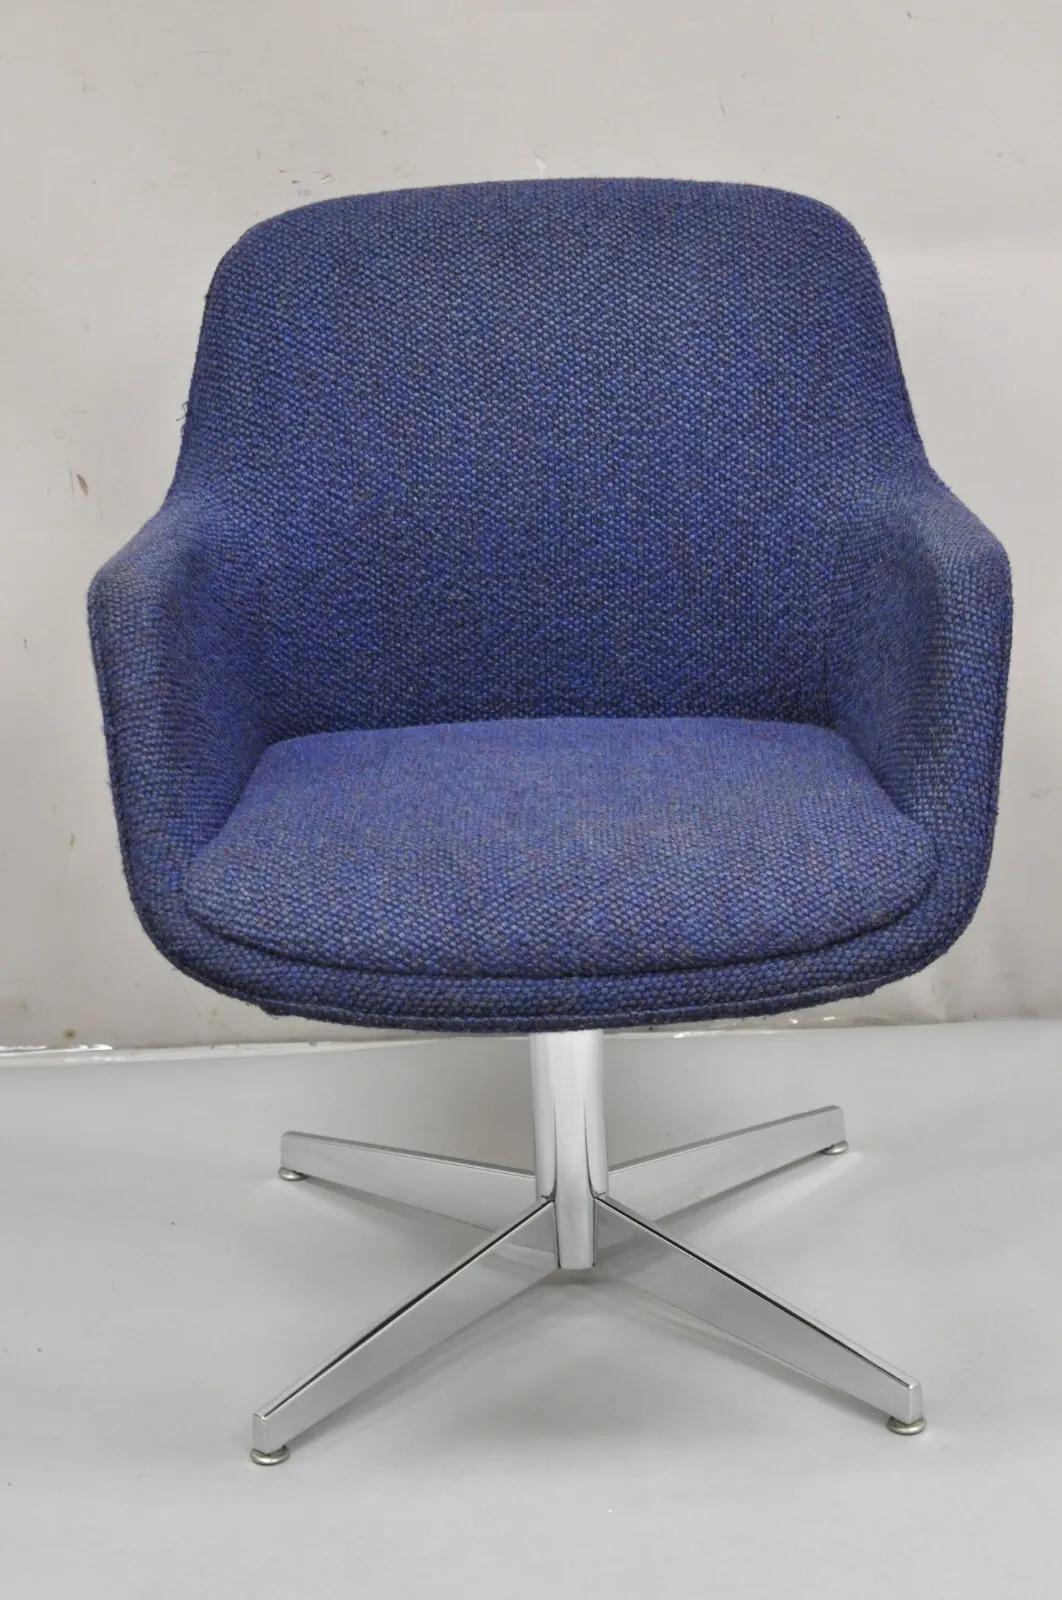 Vintage Mid Century Modern Blue Upholstered Chrome Swivel Base Club Arm Chair. Item features blue knubby wool upholstery, chrome swivel base, clean Modernist lines, very nice vintage item. Circa  Late 20th Century. Measurements: 32